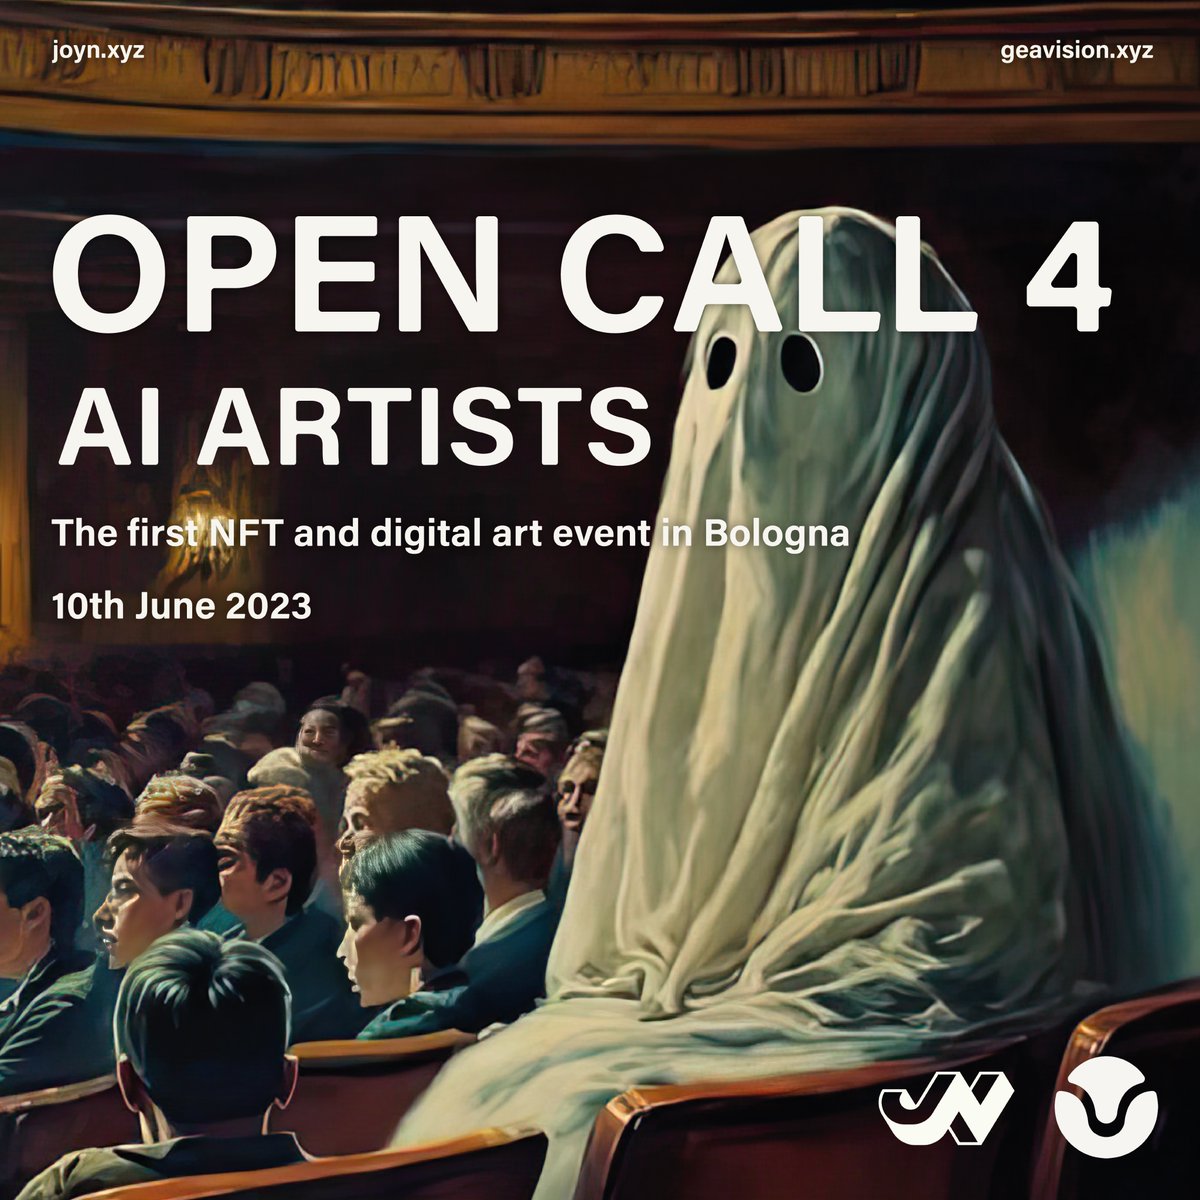 🌎OPEN CALL FOR AI ARTIST 🌎

Visual Art 4 Impact, the Italian event that aims to merge the art world and technological innovation.

To submit:
🔸RT & like this post 
🔸Follow @geavision and @joynxyz
🔸Follow @vandaloruins and @draa_go 
Read and drop your art below👇🏼✨